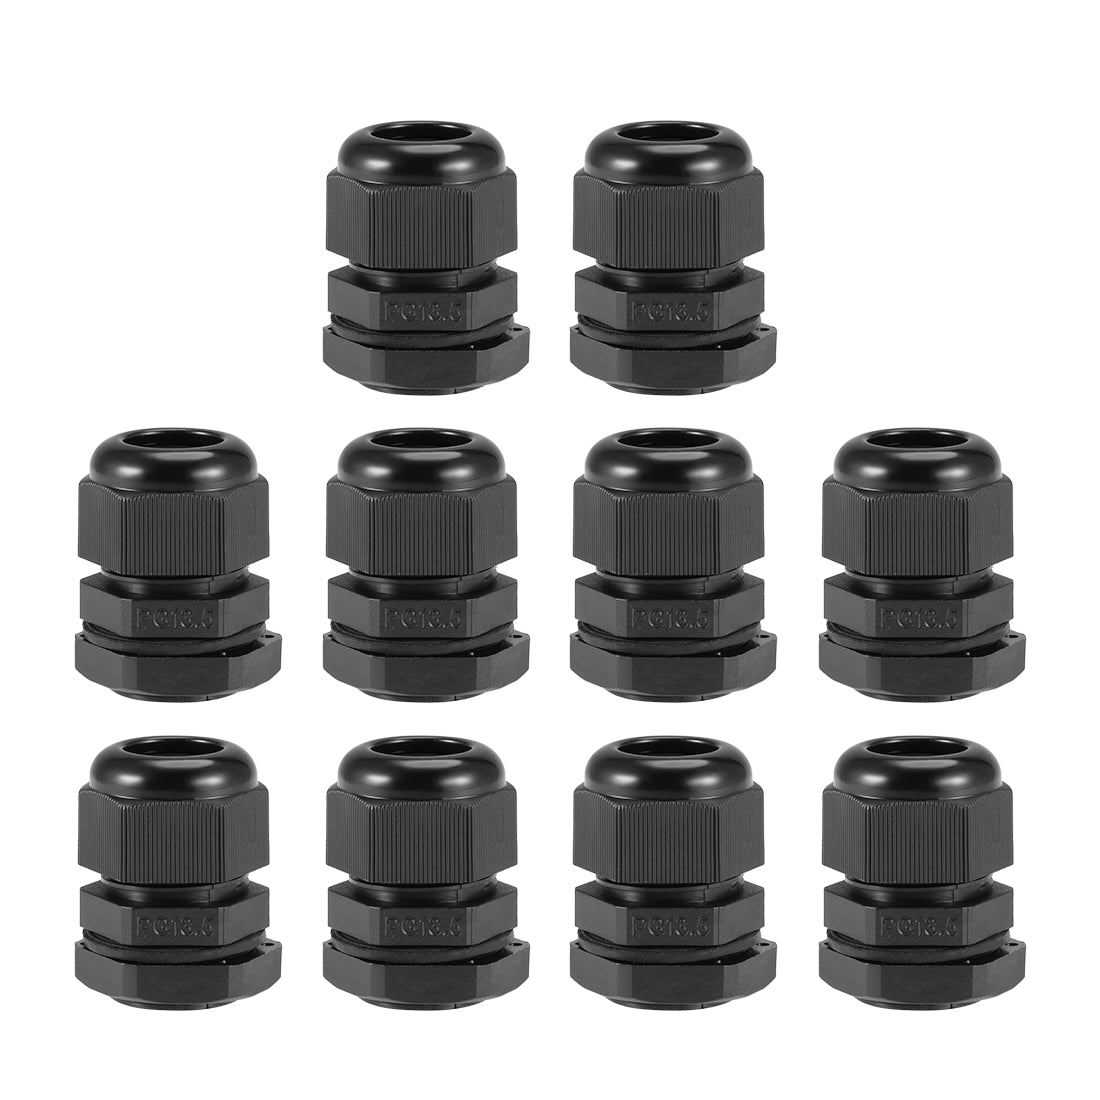 uxcell Uxcell PG13.5 Cable Gland 5mm-9mm Wire Hole Waterproof Nylon Joint Adjustable Locknut with Washer Black 10pcs